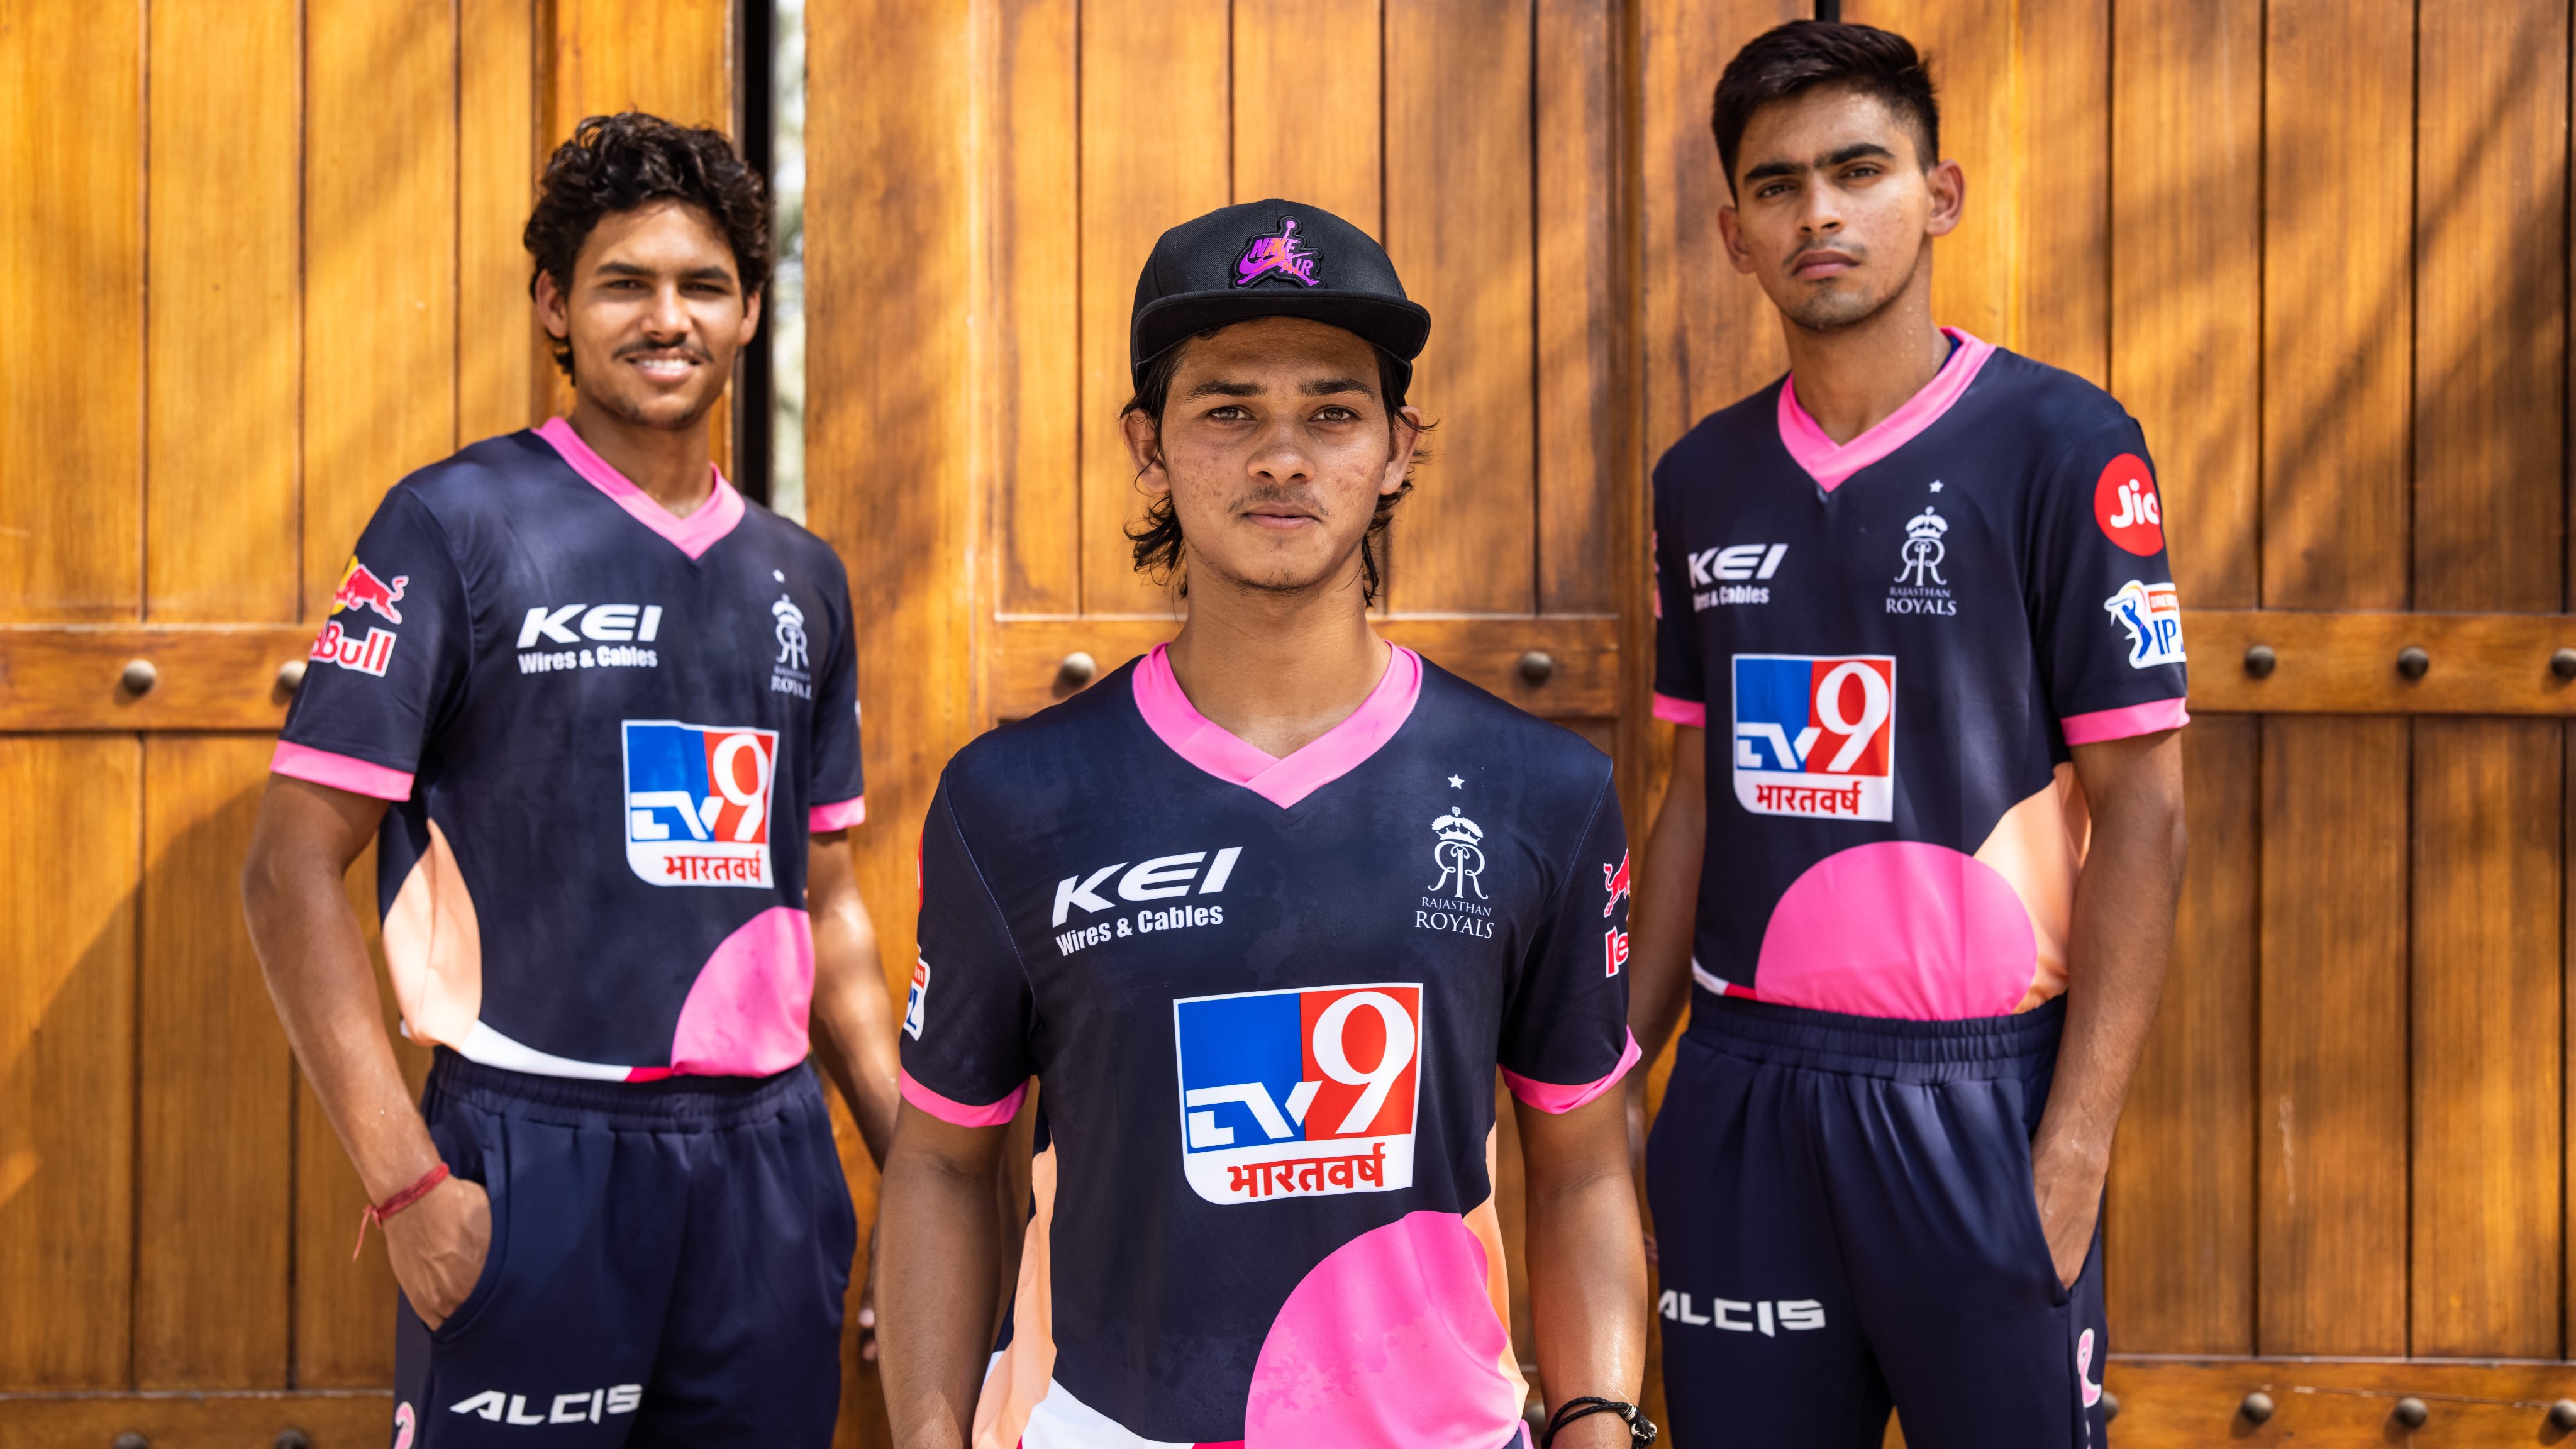 Rajasthan Royals youngsters in their new kits | Rajasthan Royals Twitter